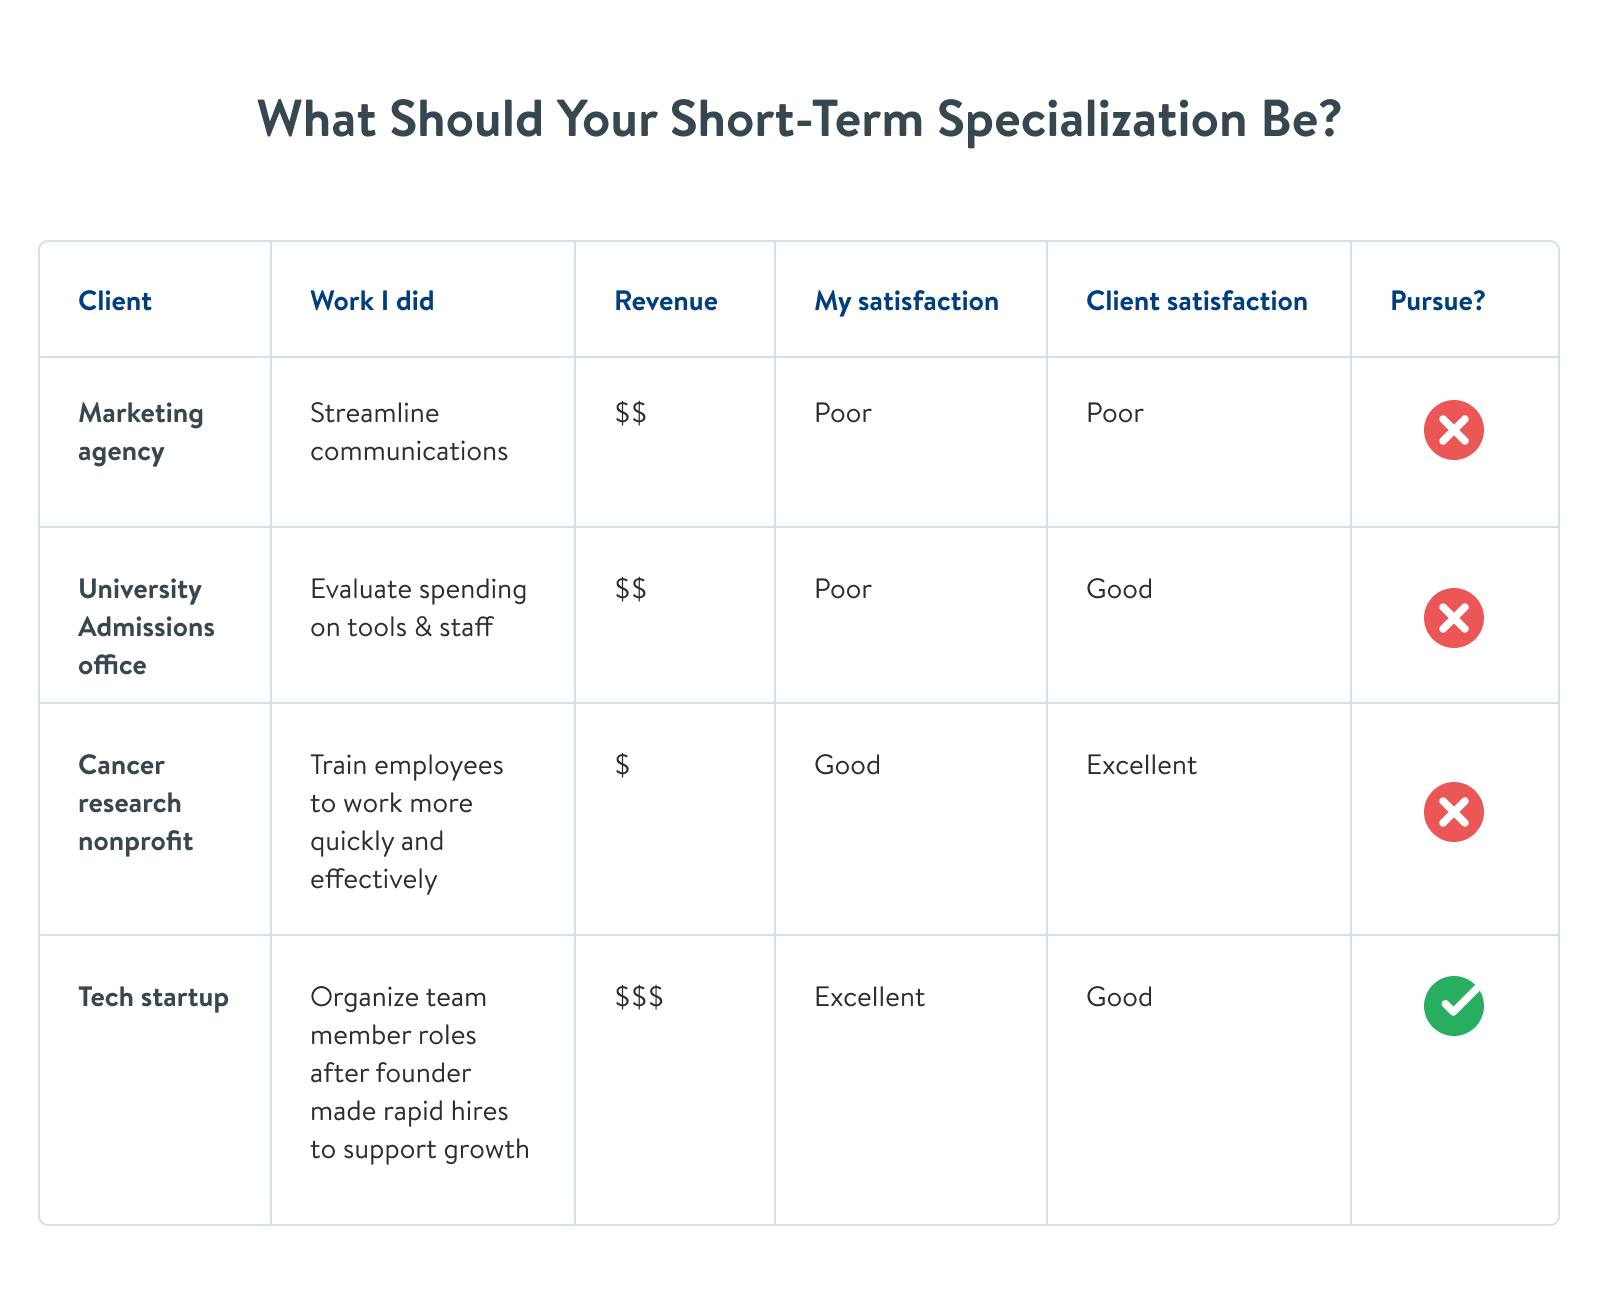 What should your short-term specialization be? (And whether to pursue based on multiple factors)